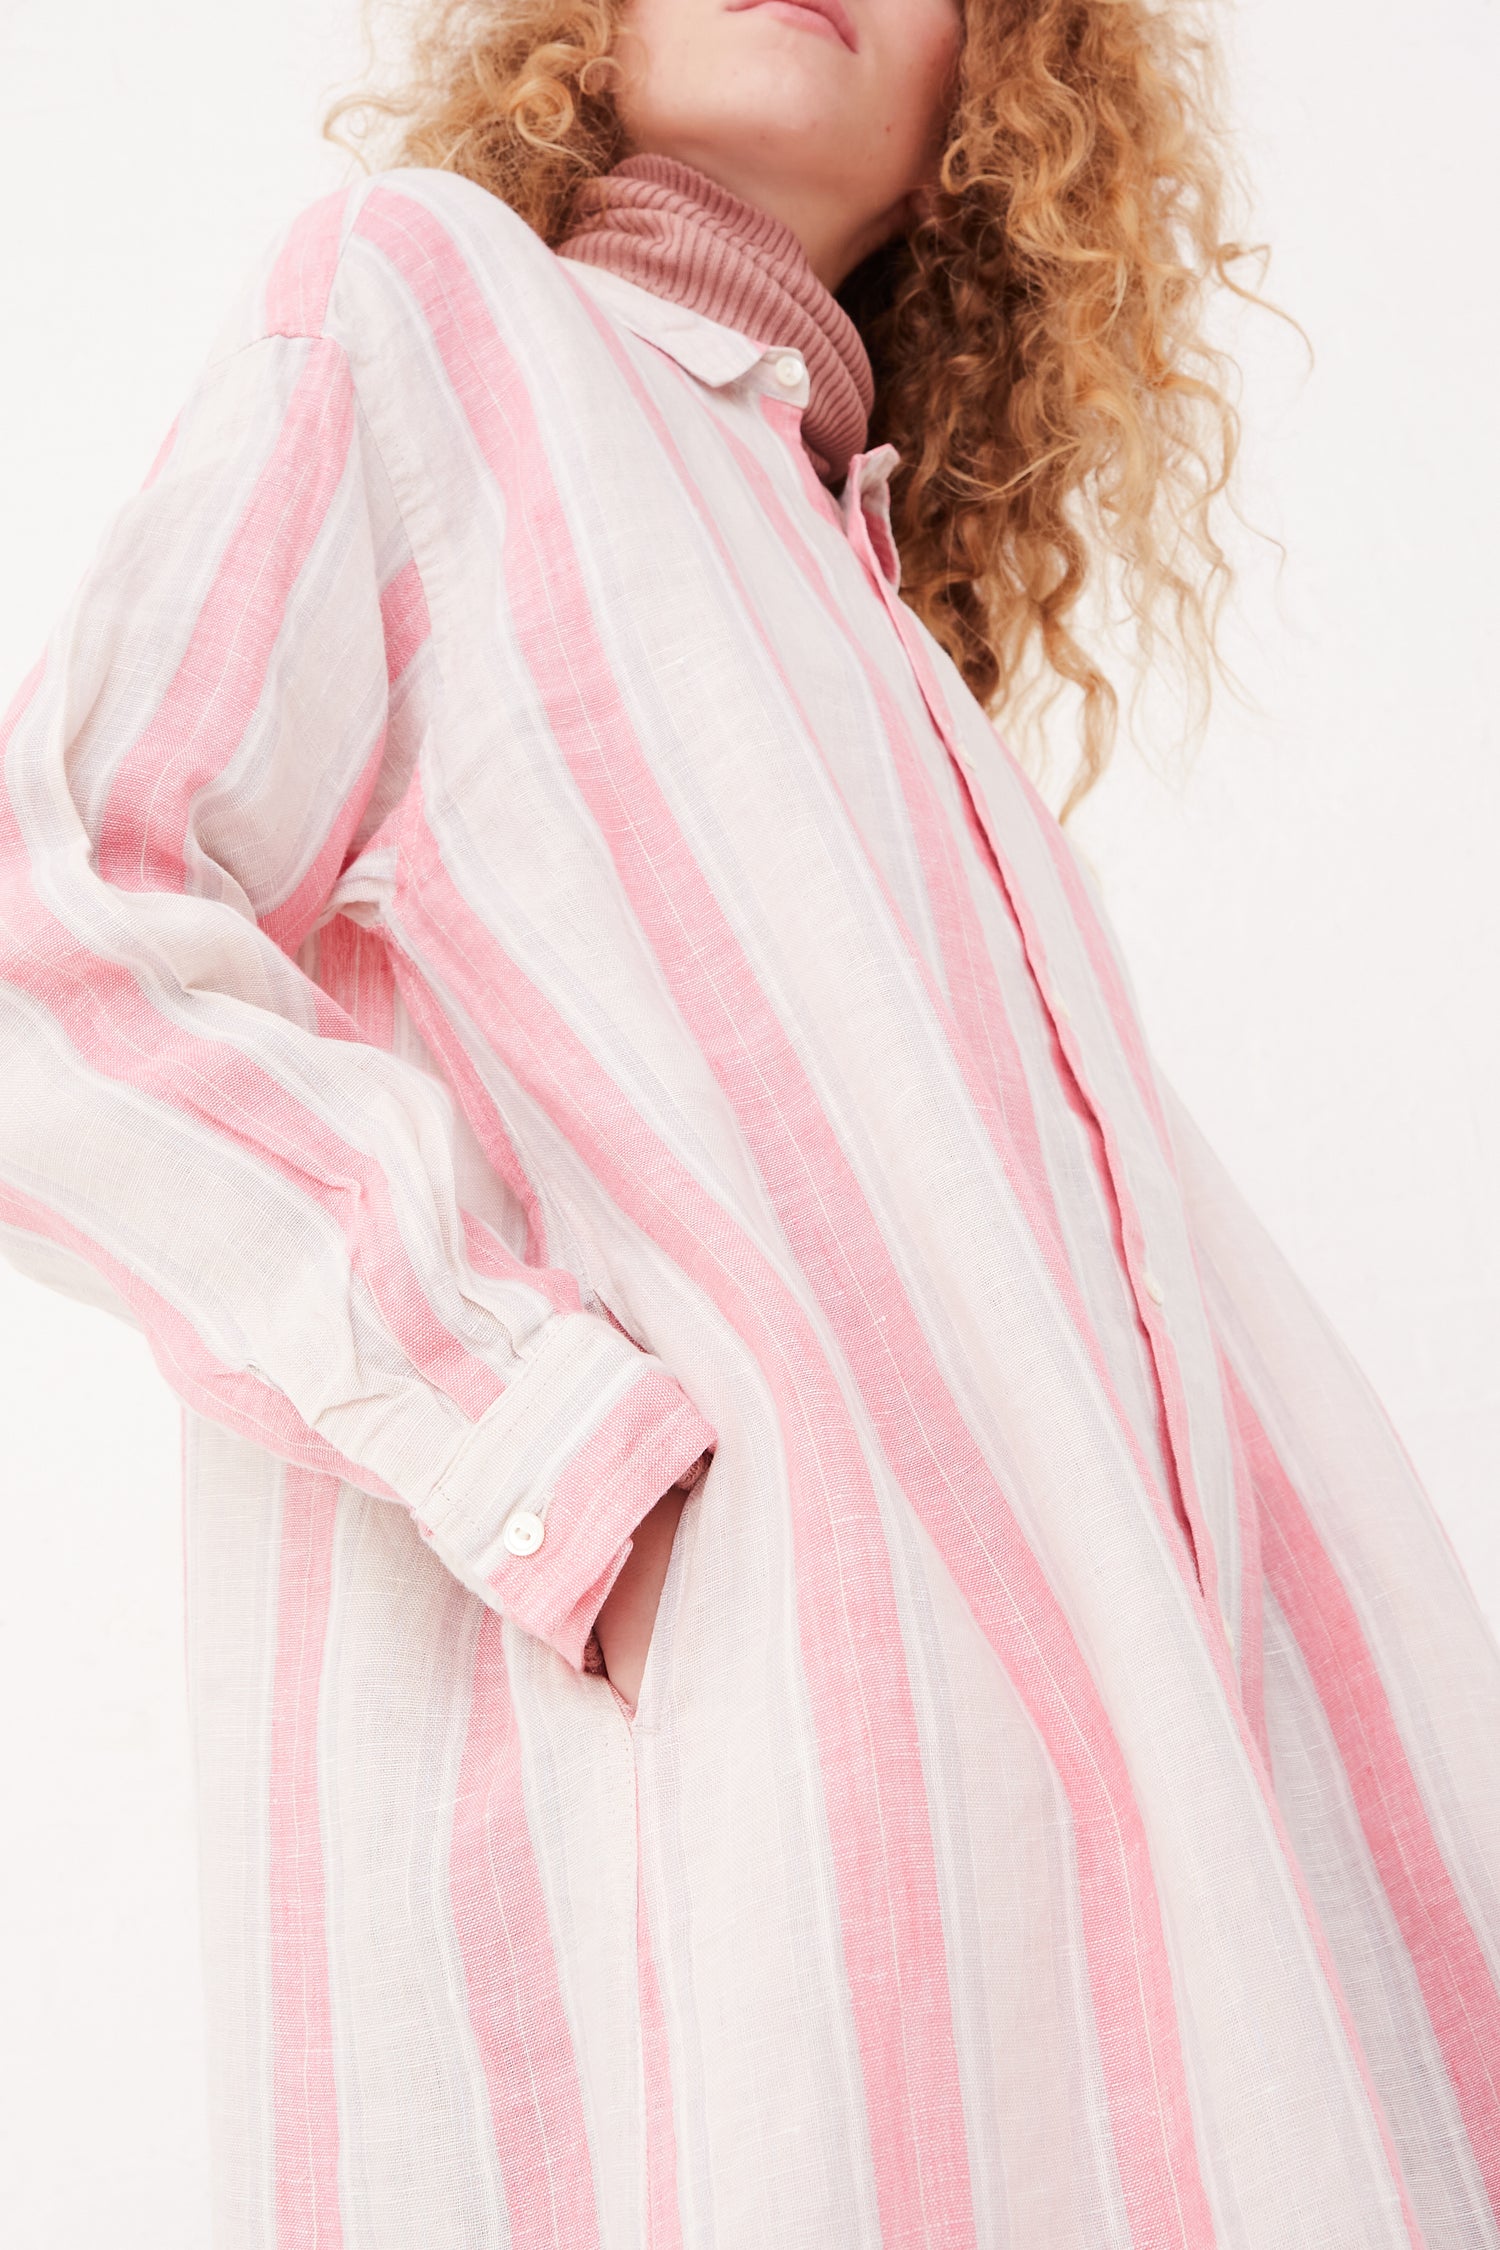 A model wearing the Linen Stripe Dress in Pink by Ichi Antiquités, a relaxed fit dress.